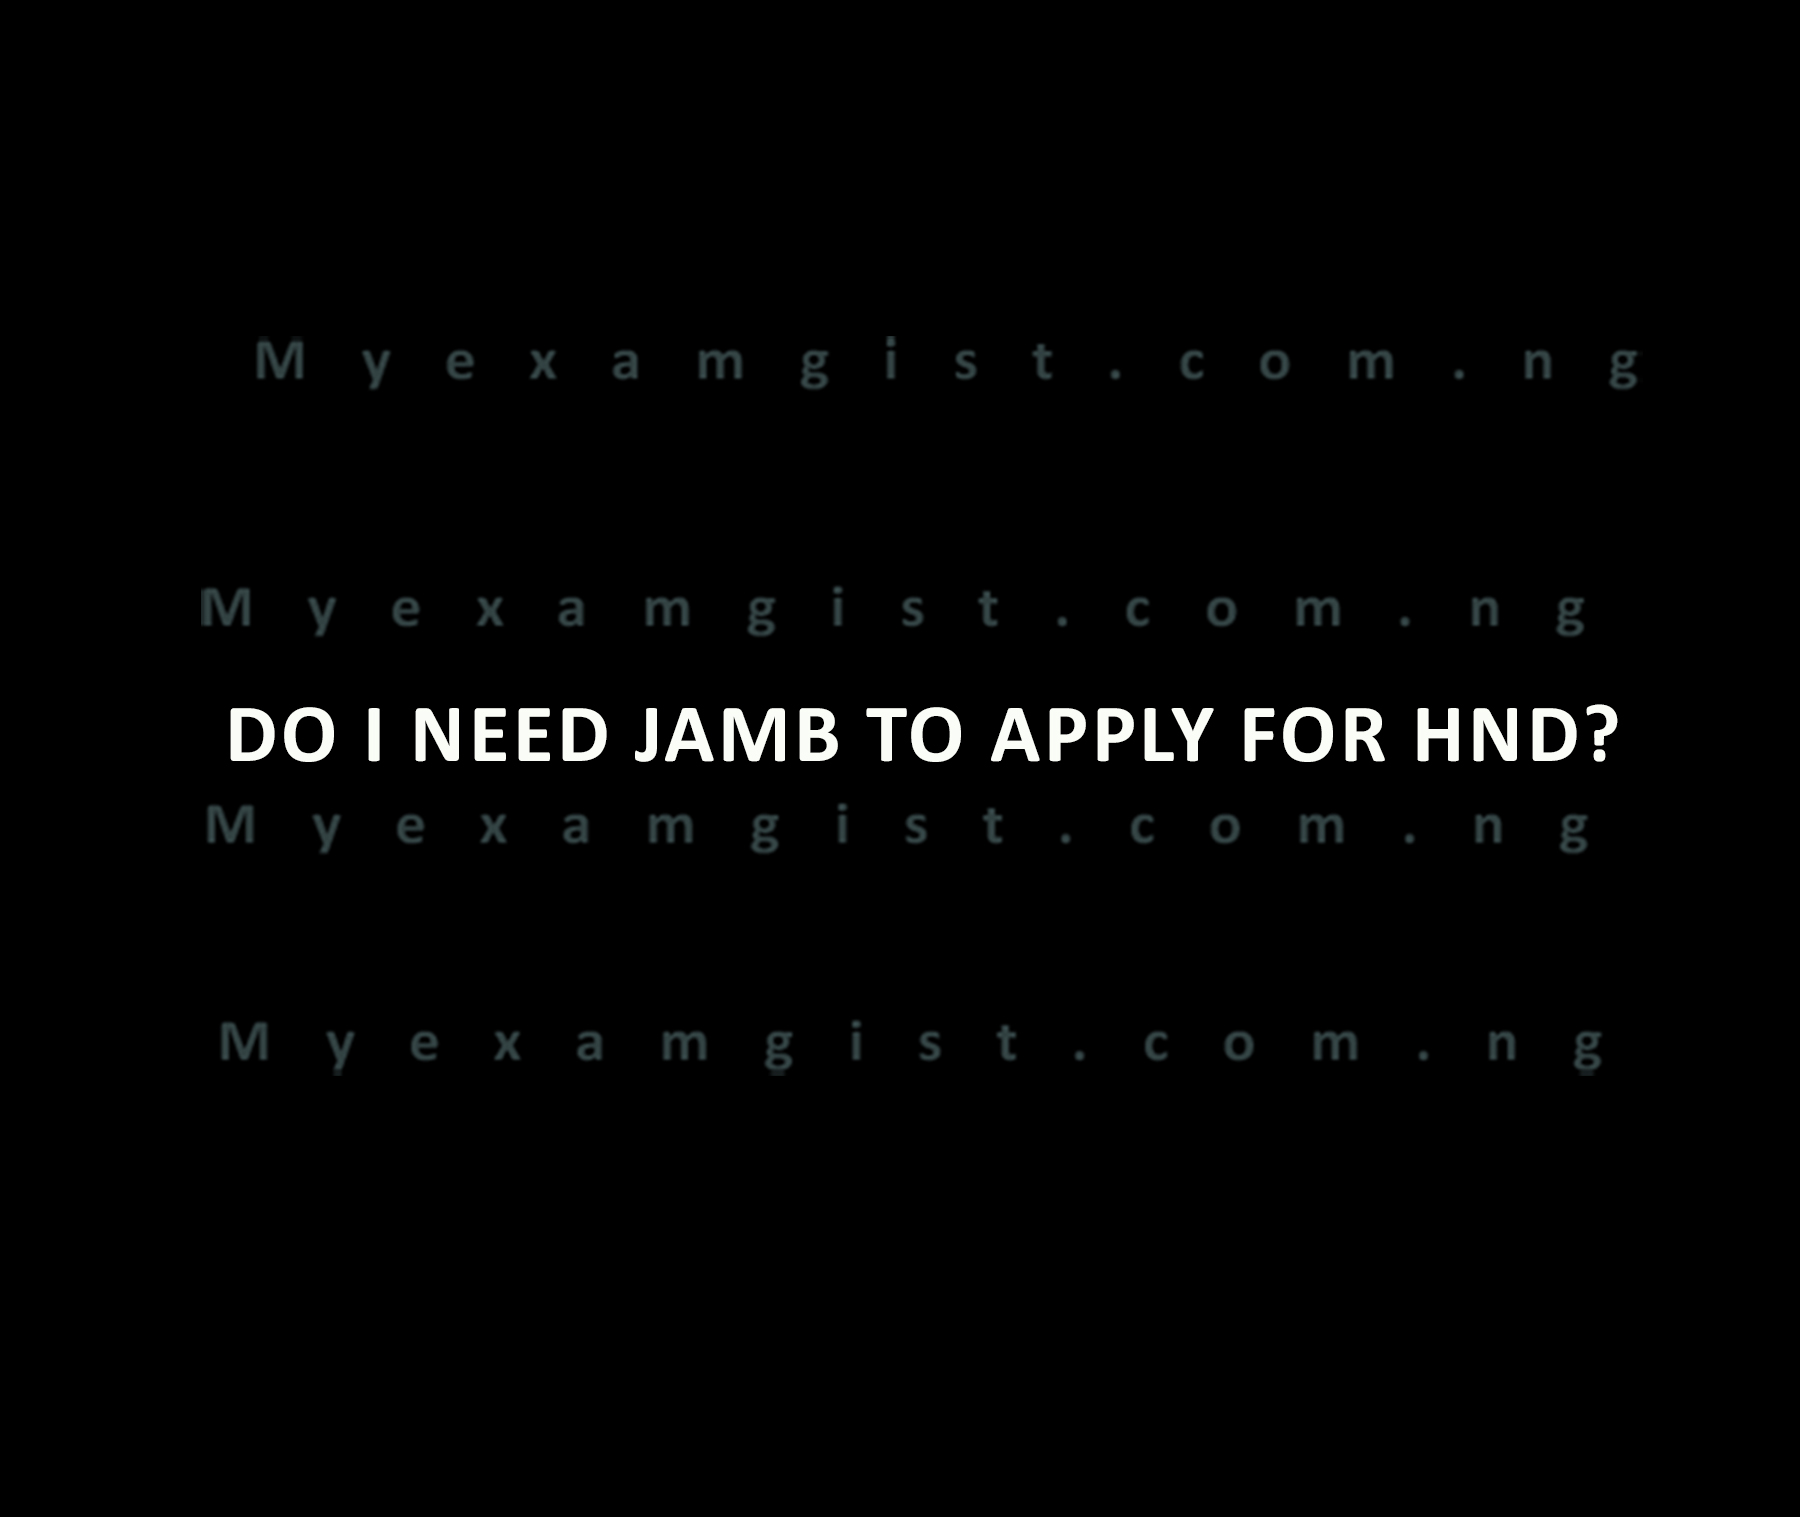 Do I need JAMB to apply for HND